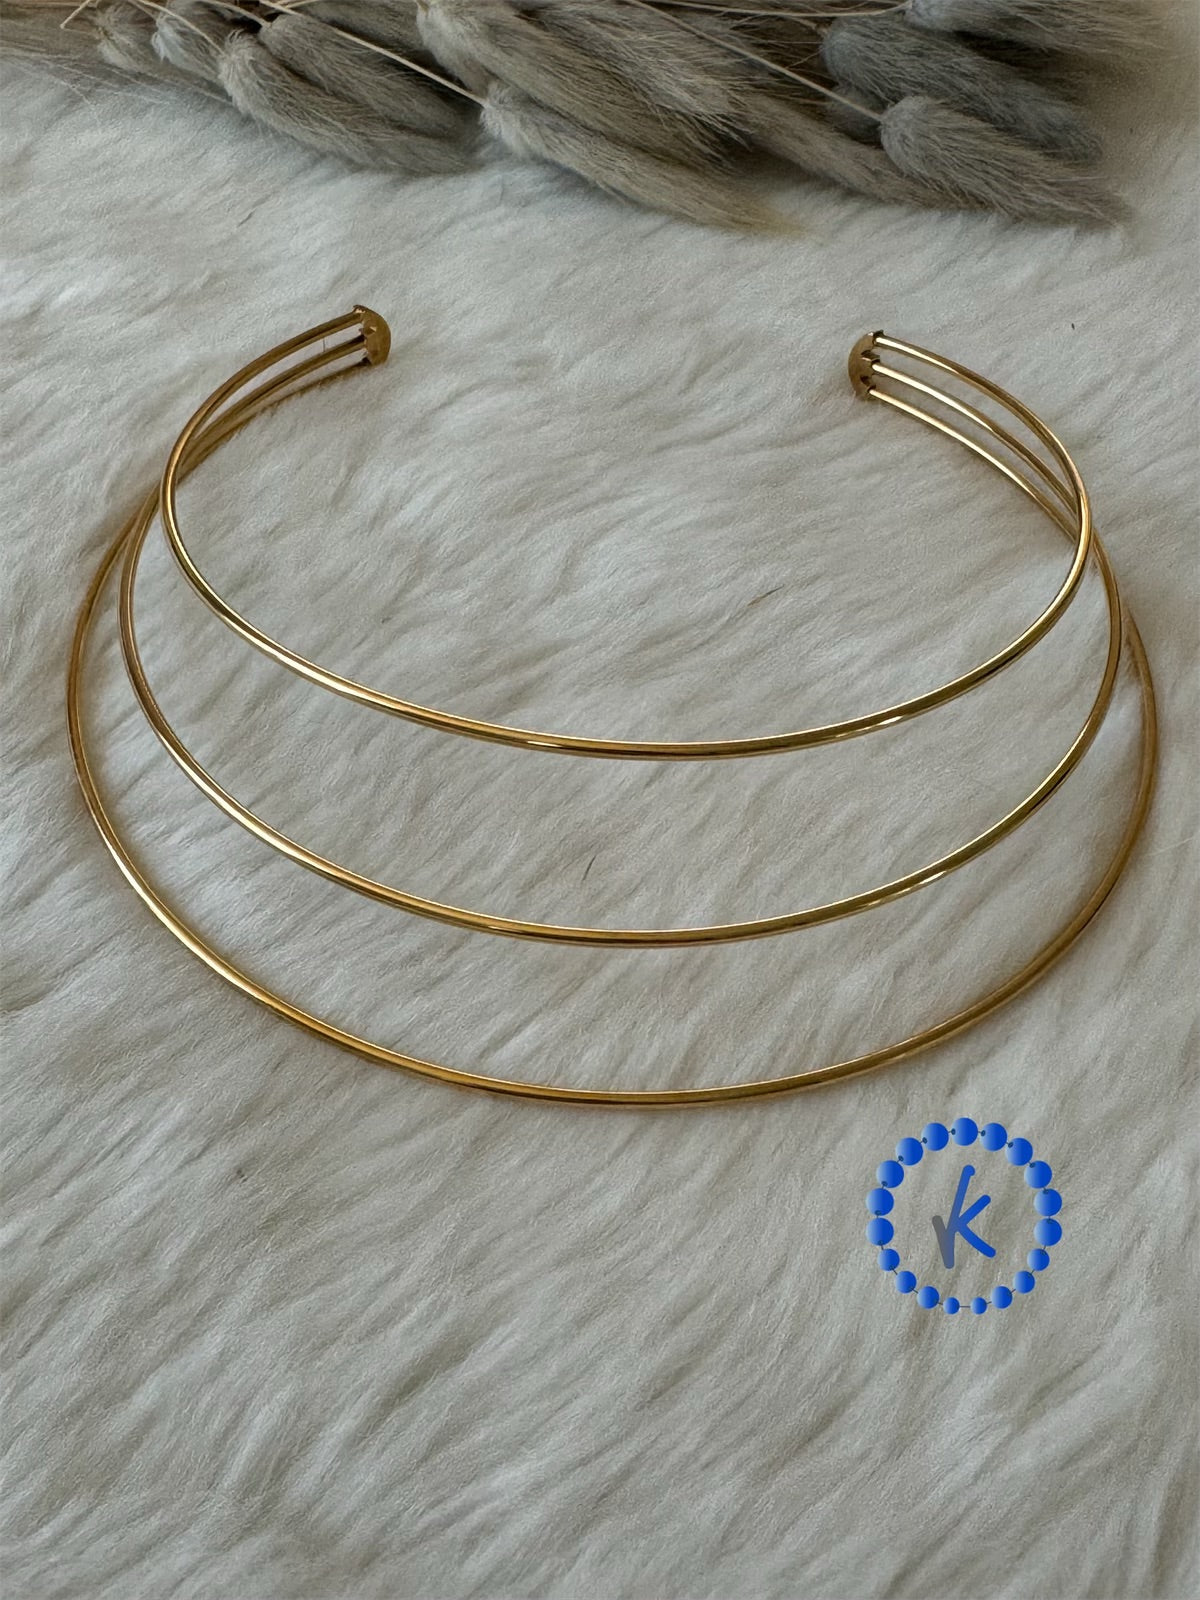 Attractive Stainless Steel Choker